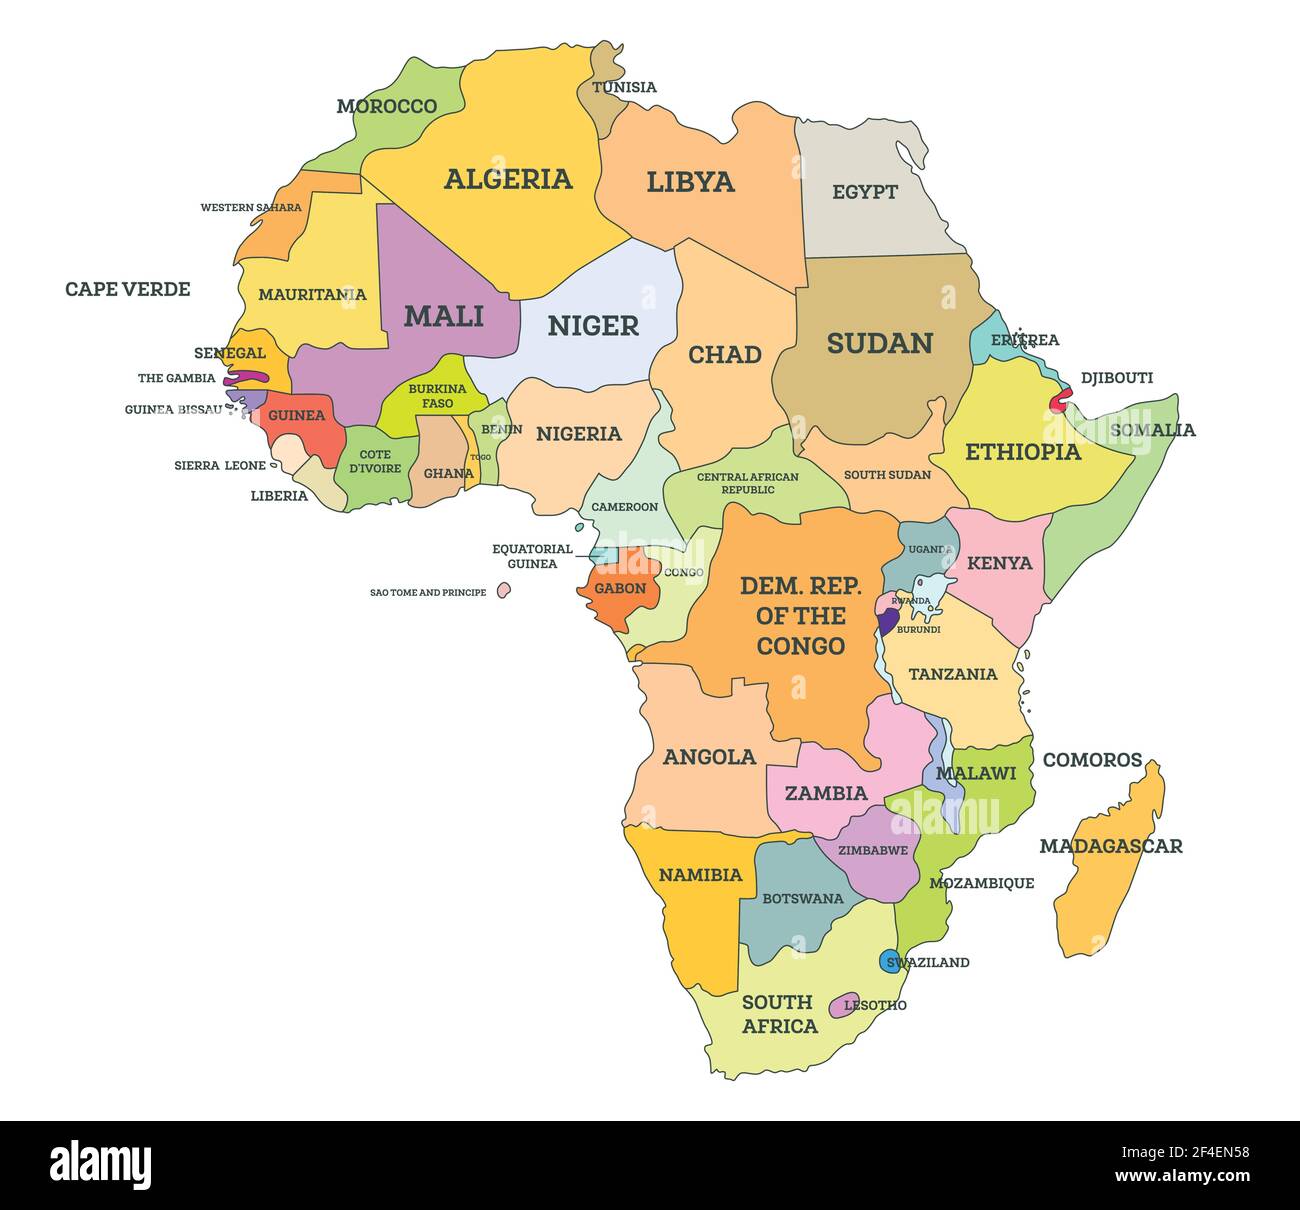 South Africa Map  HD Political Map of South Africa to Free Download